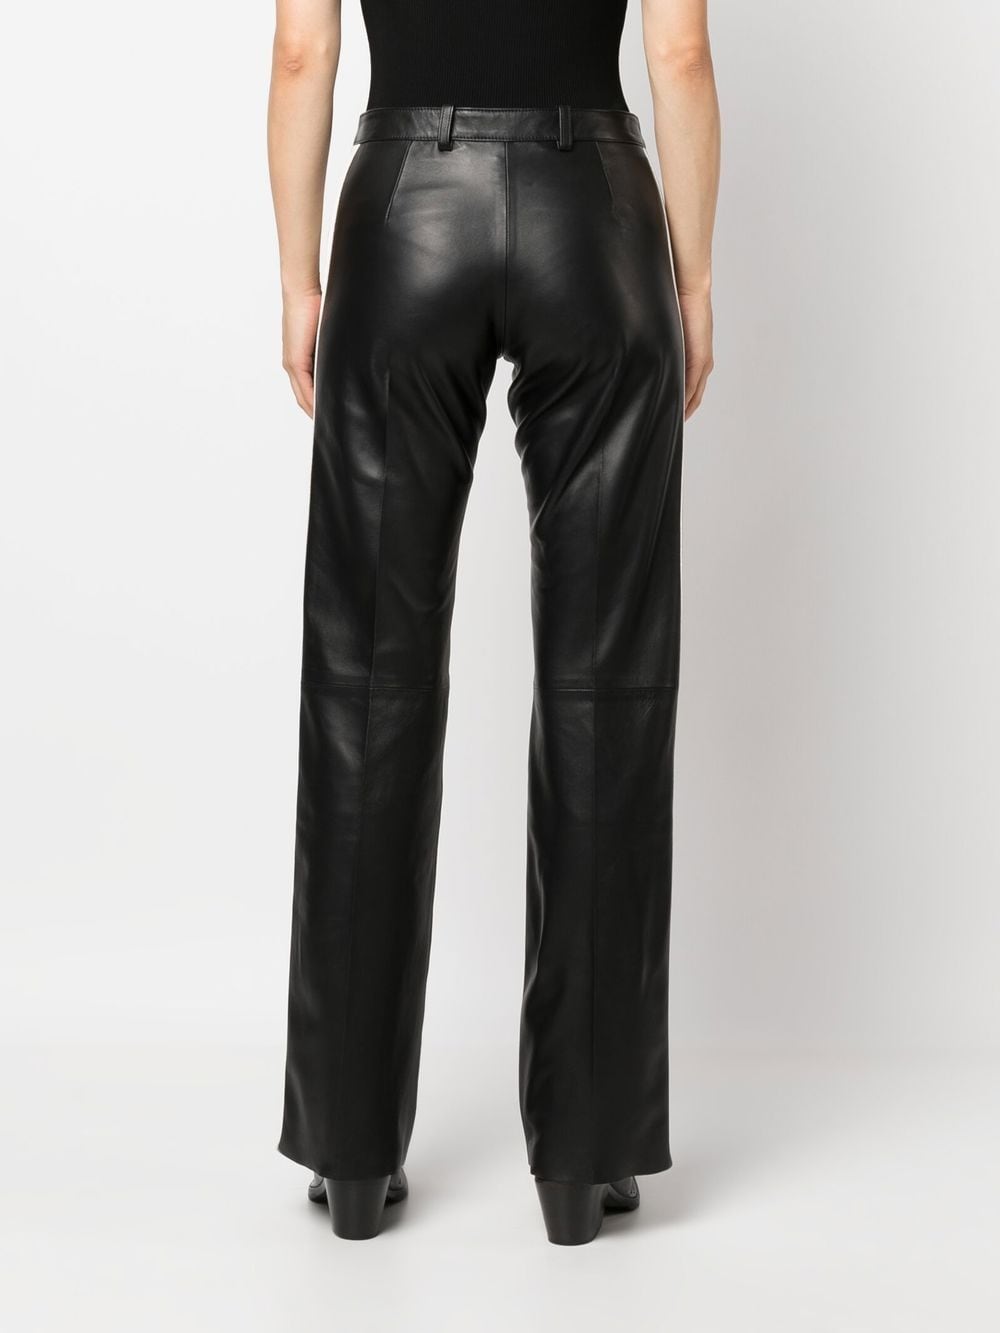 Gucci 90s Tom Ford Era Aubergine Leather Pants  BLOGGER ARMOIRE